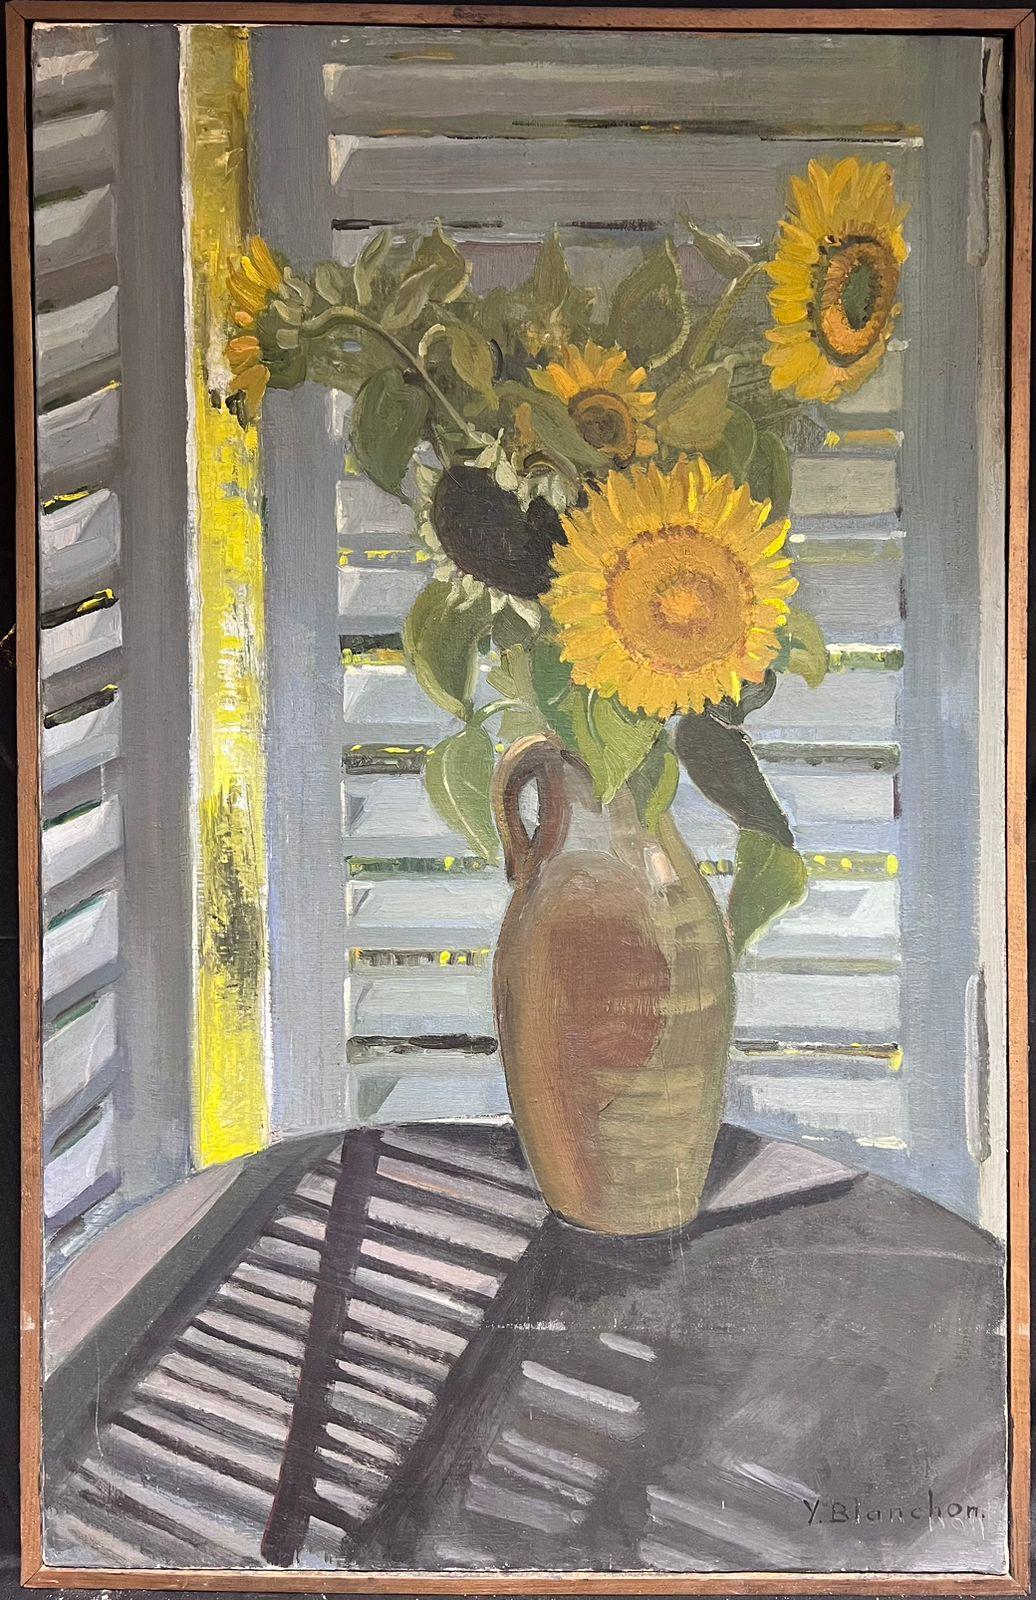 Huge 1930's French Signed Oil Sunflowers in Vase in Interior Windowsill Scene - Painting by French School, 1930's